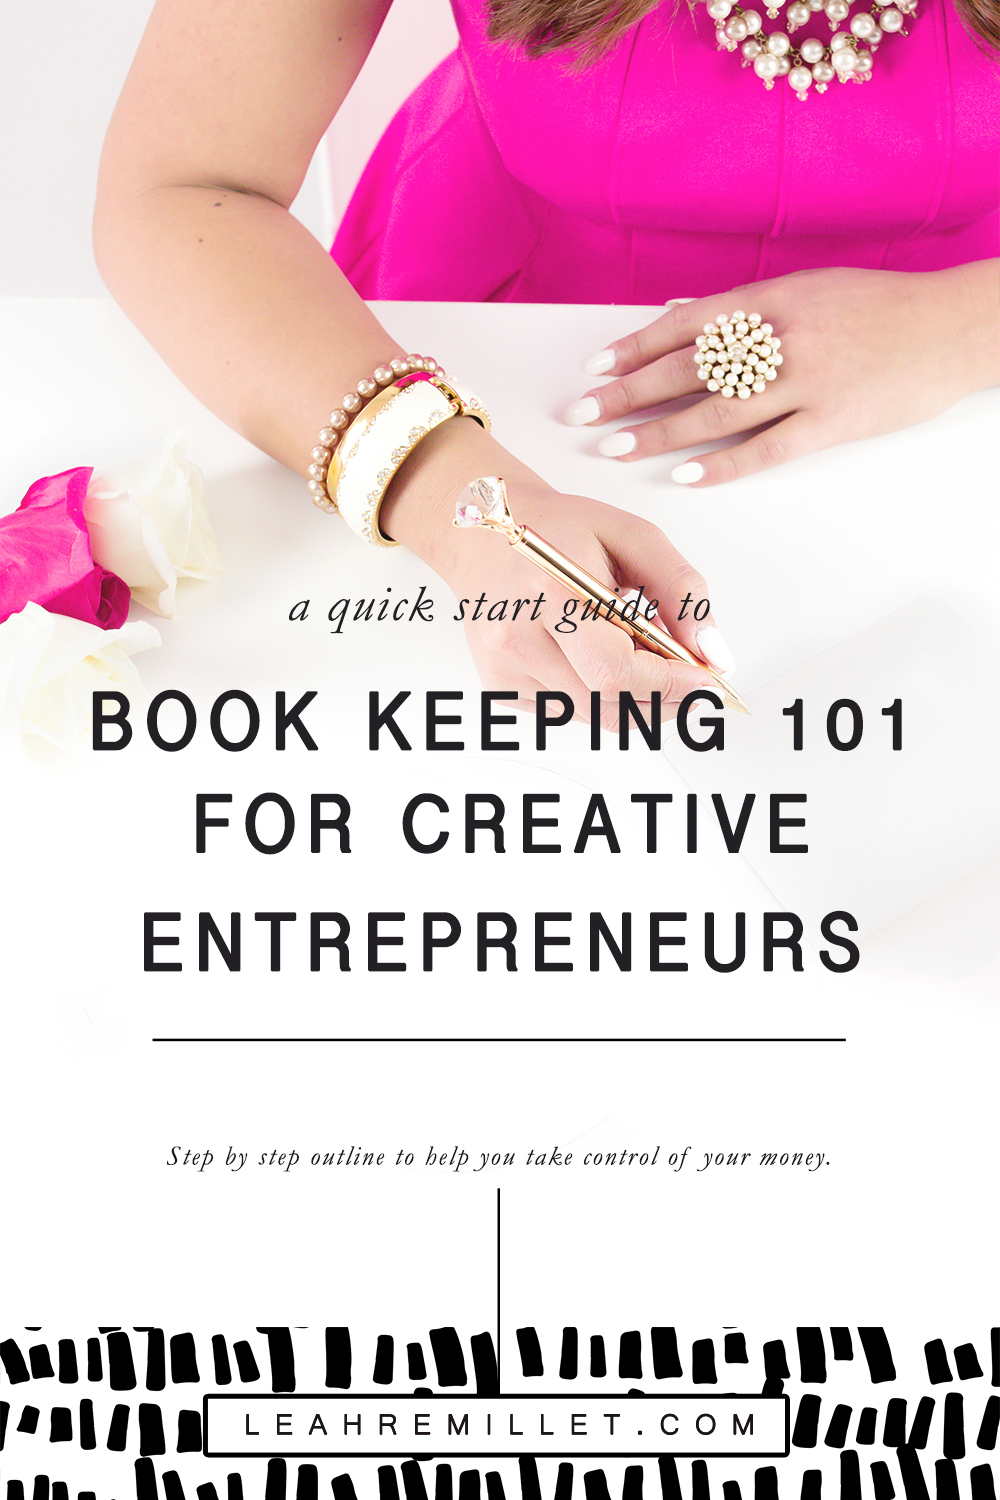 Book Keeping 101 for Creatives